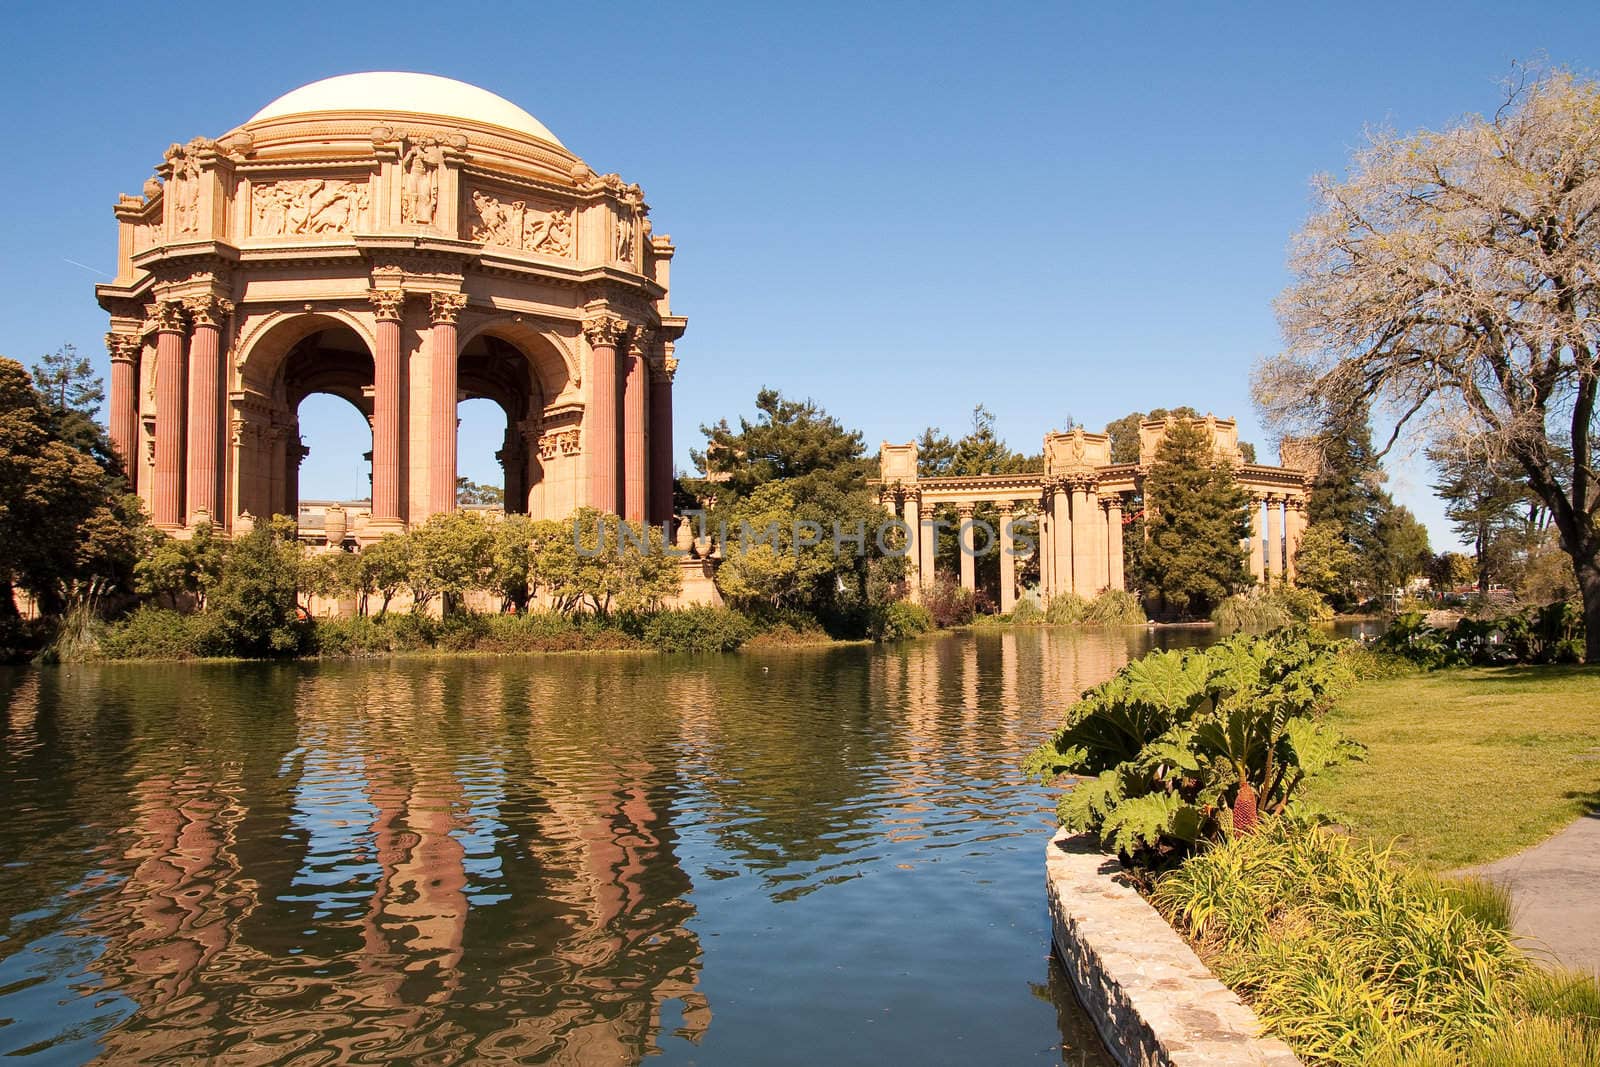 The Palace of Fine Arts has been a favorite wedding location for couples throughout the San Francisco Bay Area. It is also a good place to spend your evening with your love one.